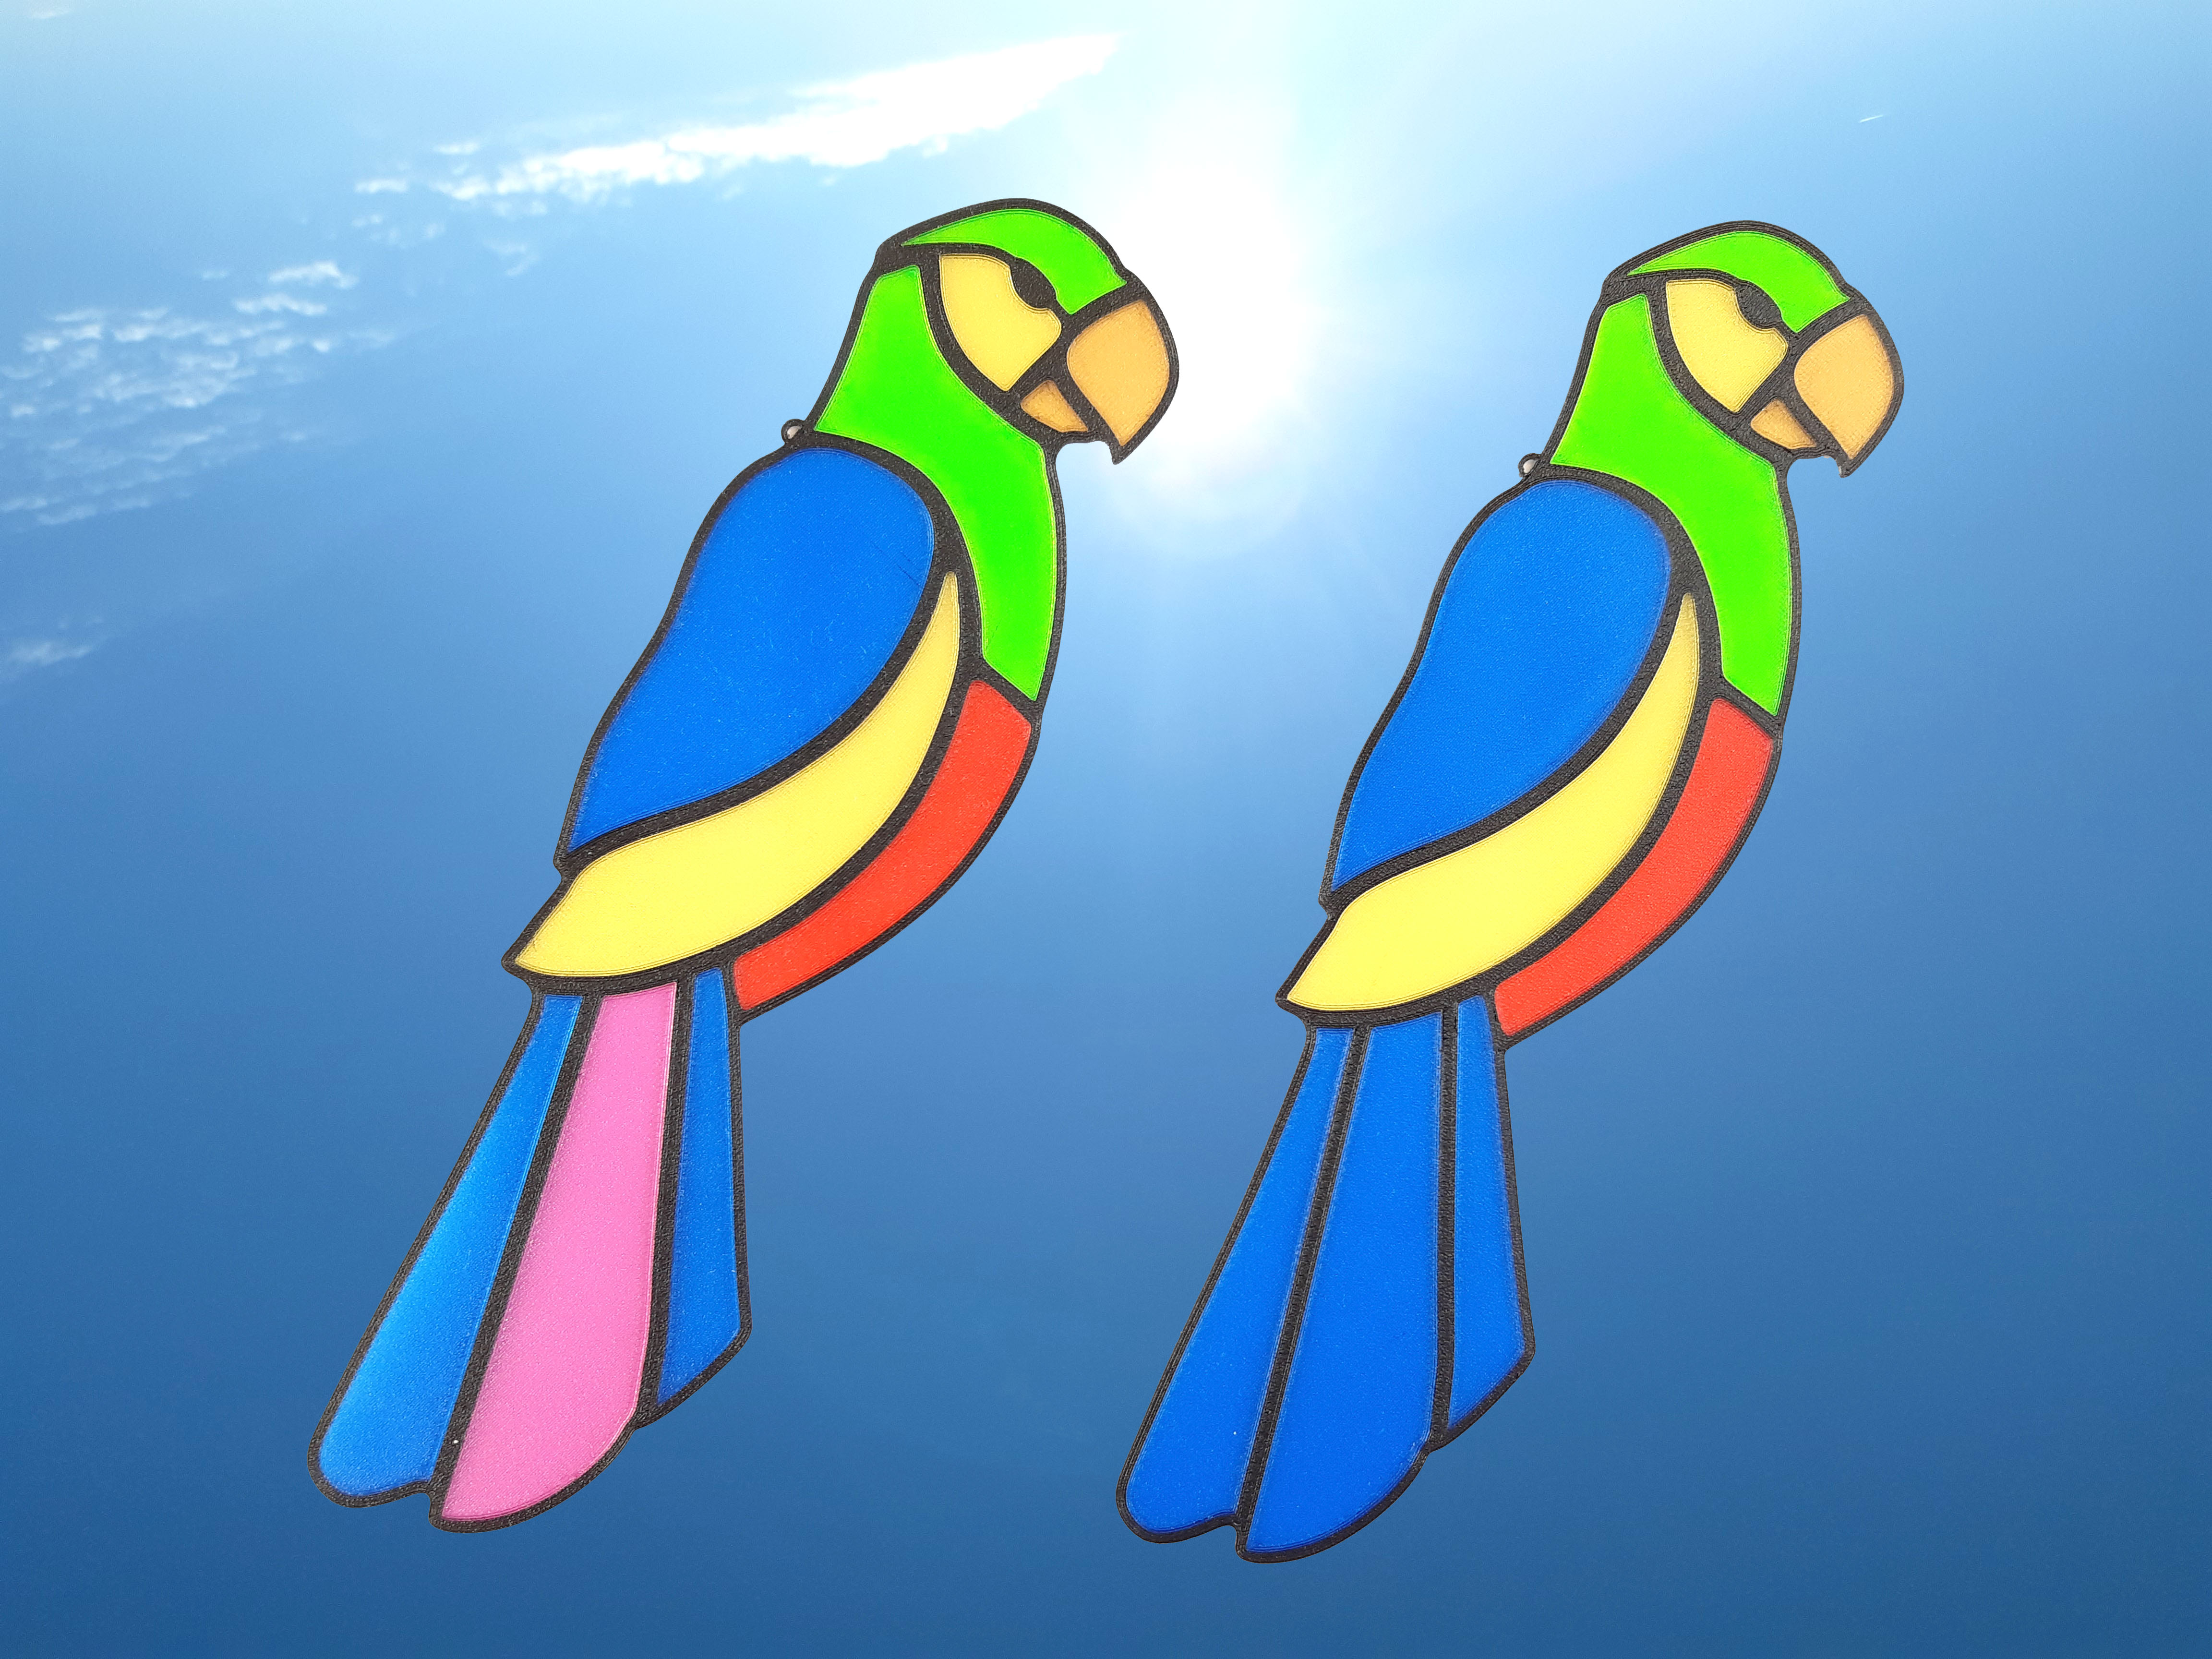 Window decoration parrot - 3D printed "stained glass"